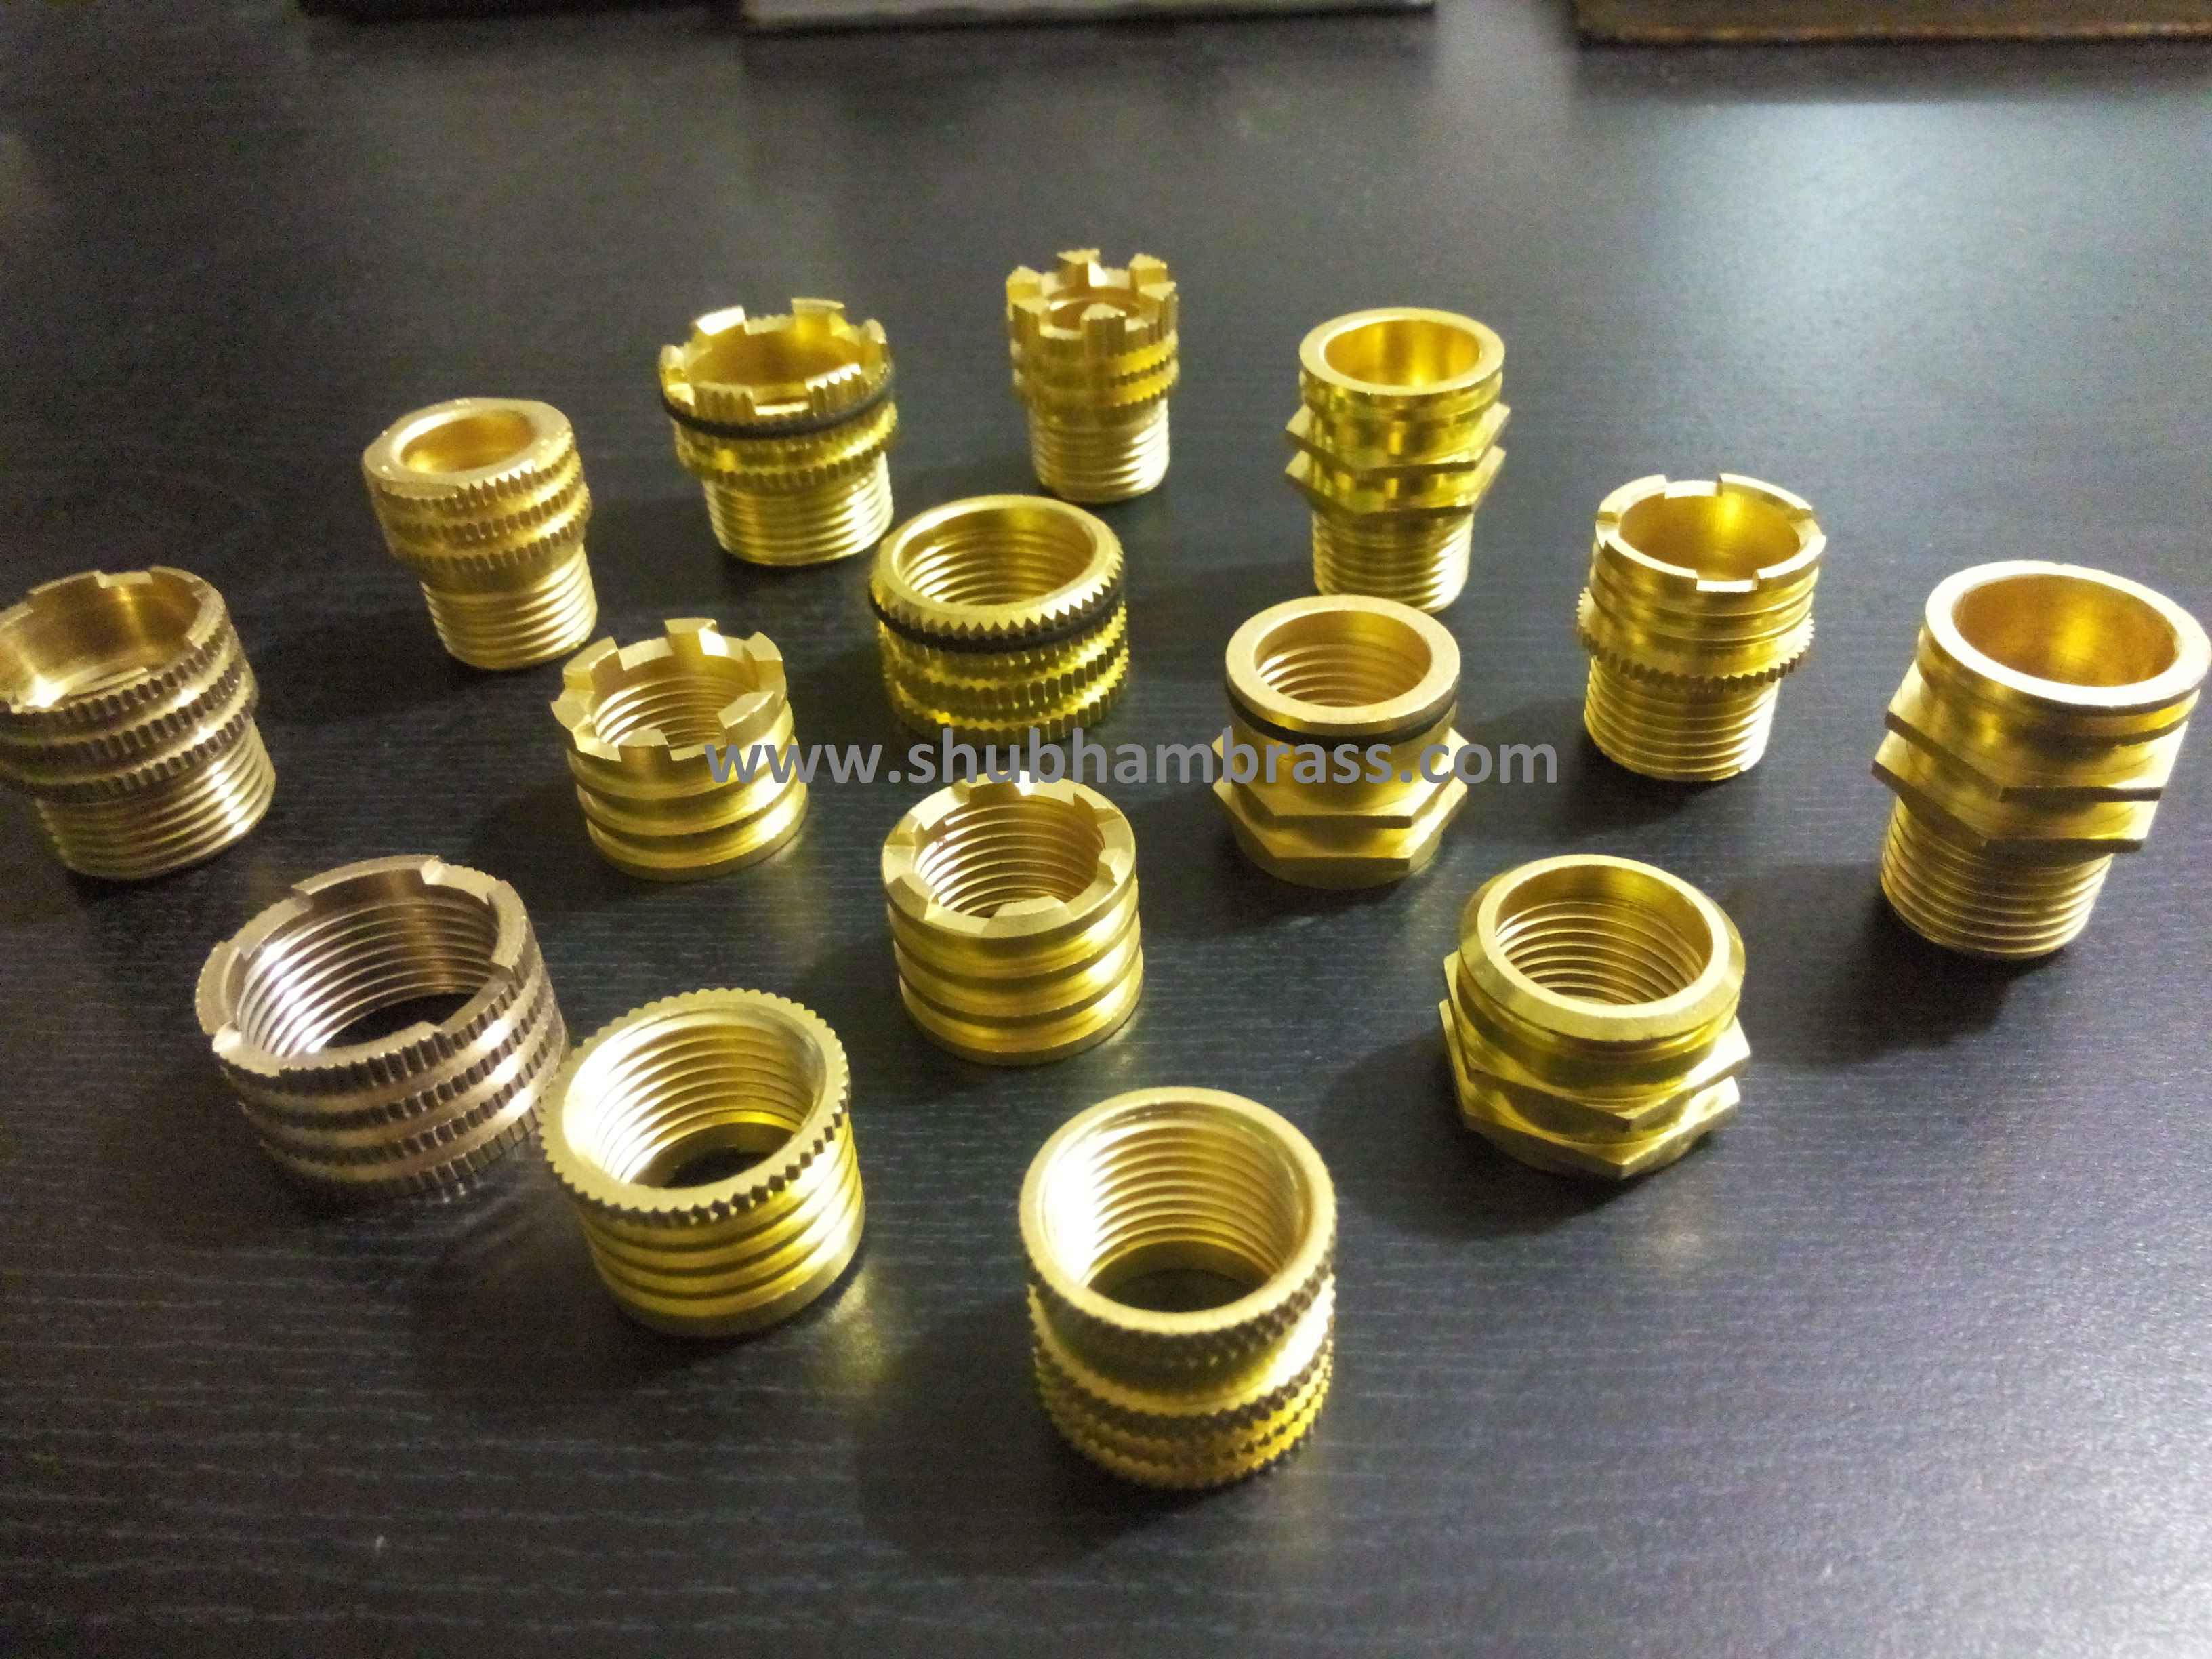 Brass Moulding Inserts, Brass Parts supplier in Jamnagar, Brass Moulding Inserts Manufacturer, Brass Moulding Inserts Supplier, Brass Moulding Inserts Manufacturers, Brass Moulding Inserts Suppliers, Brass Moulding Inserts Manufacturer, Brass Moulding Inserts Supplier